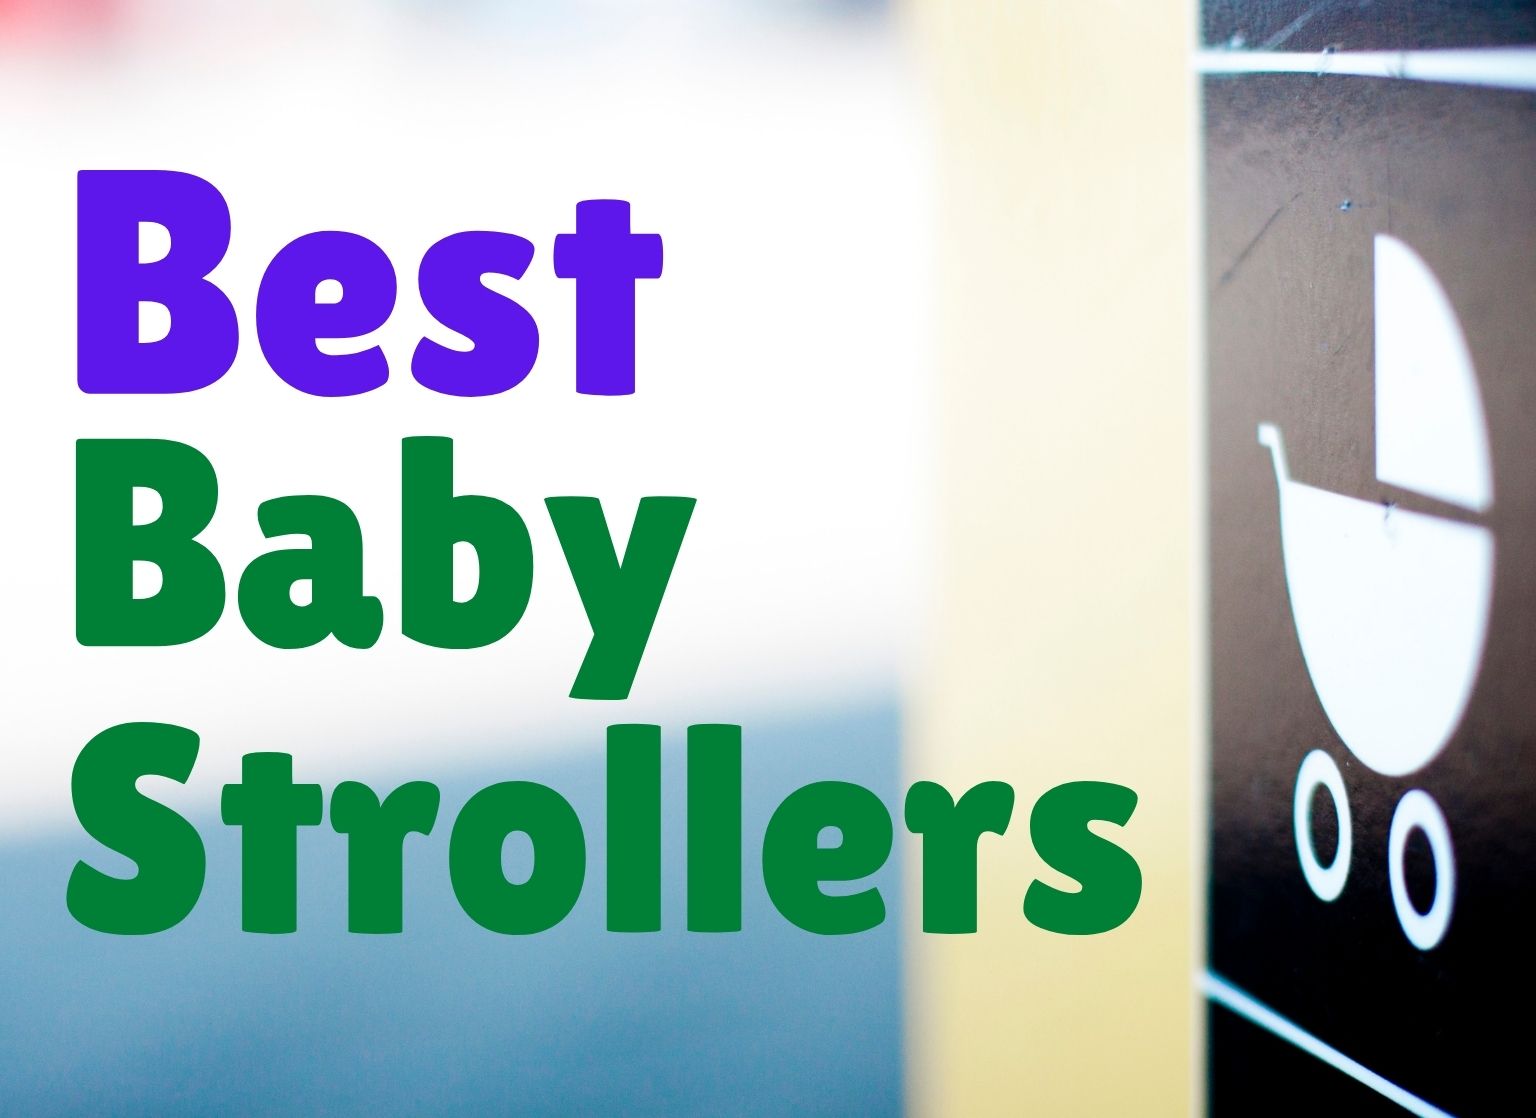 Best Baby Strollers - title